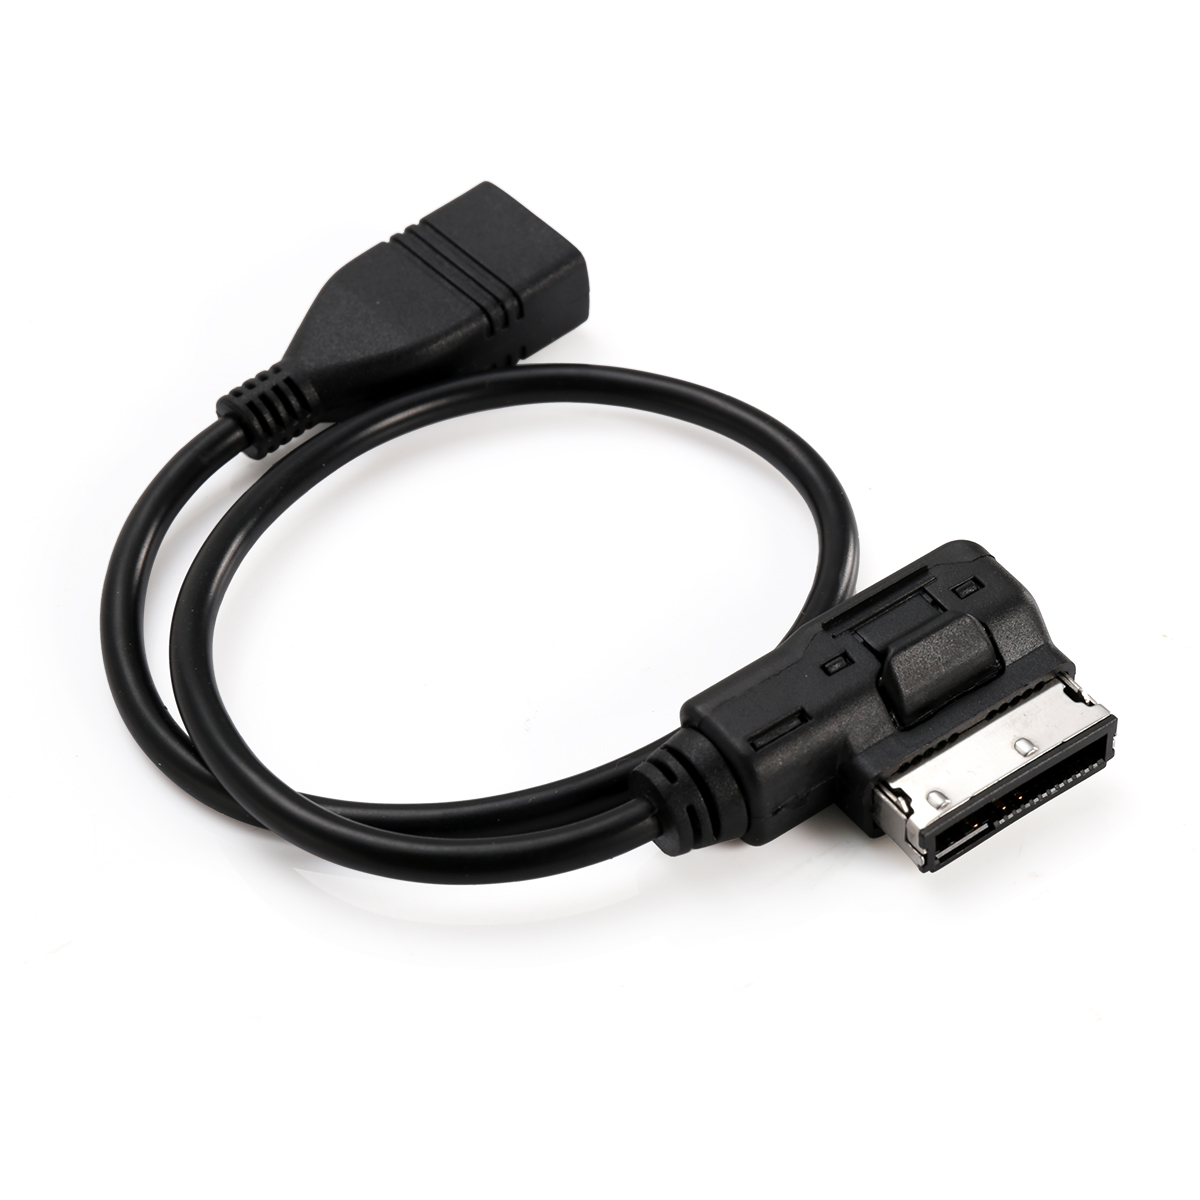 AUDI VW Music Interface MDI MMI AMI to USB Charging Sync Data Cable Adapter